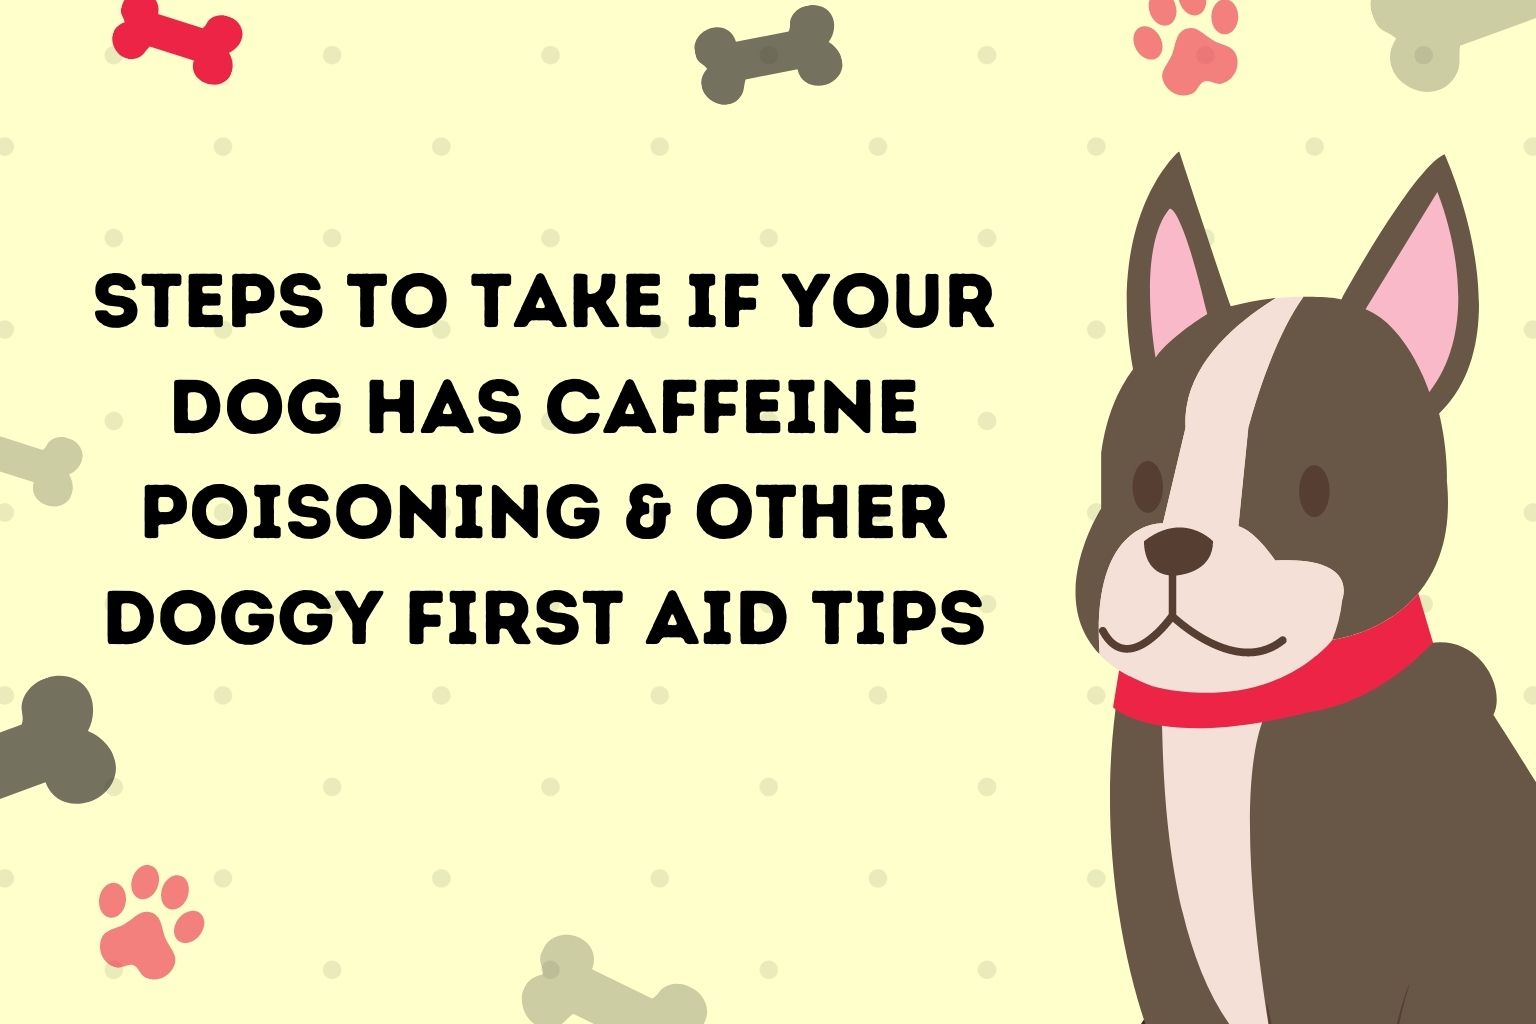 Steps to Take if Your Dog Has Caffeine Poisoning & Other Doggy First Aid Tips